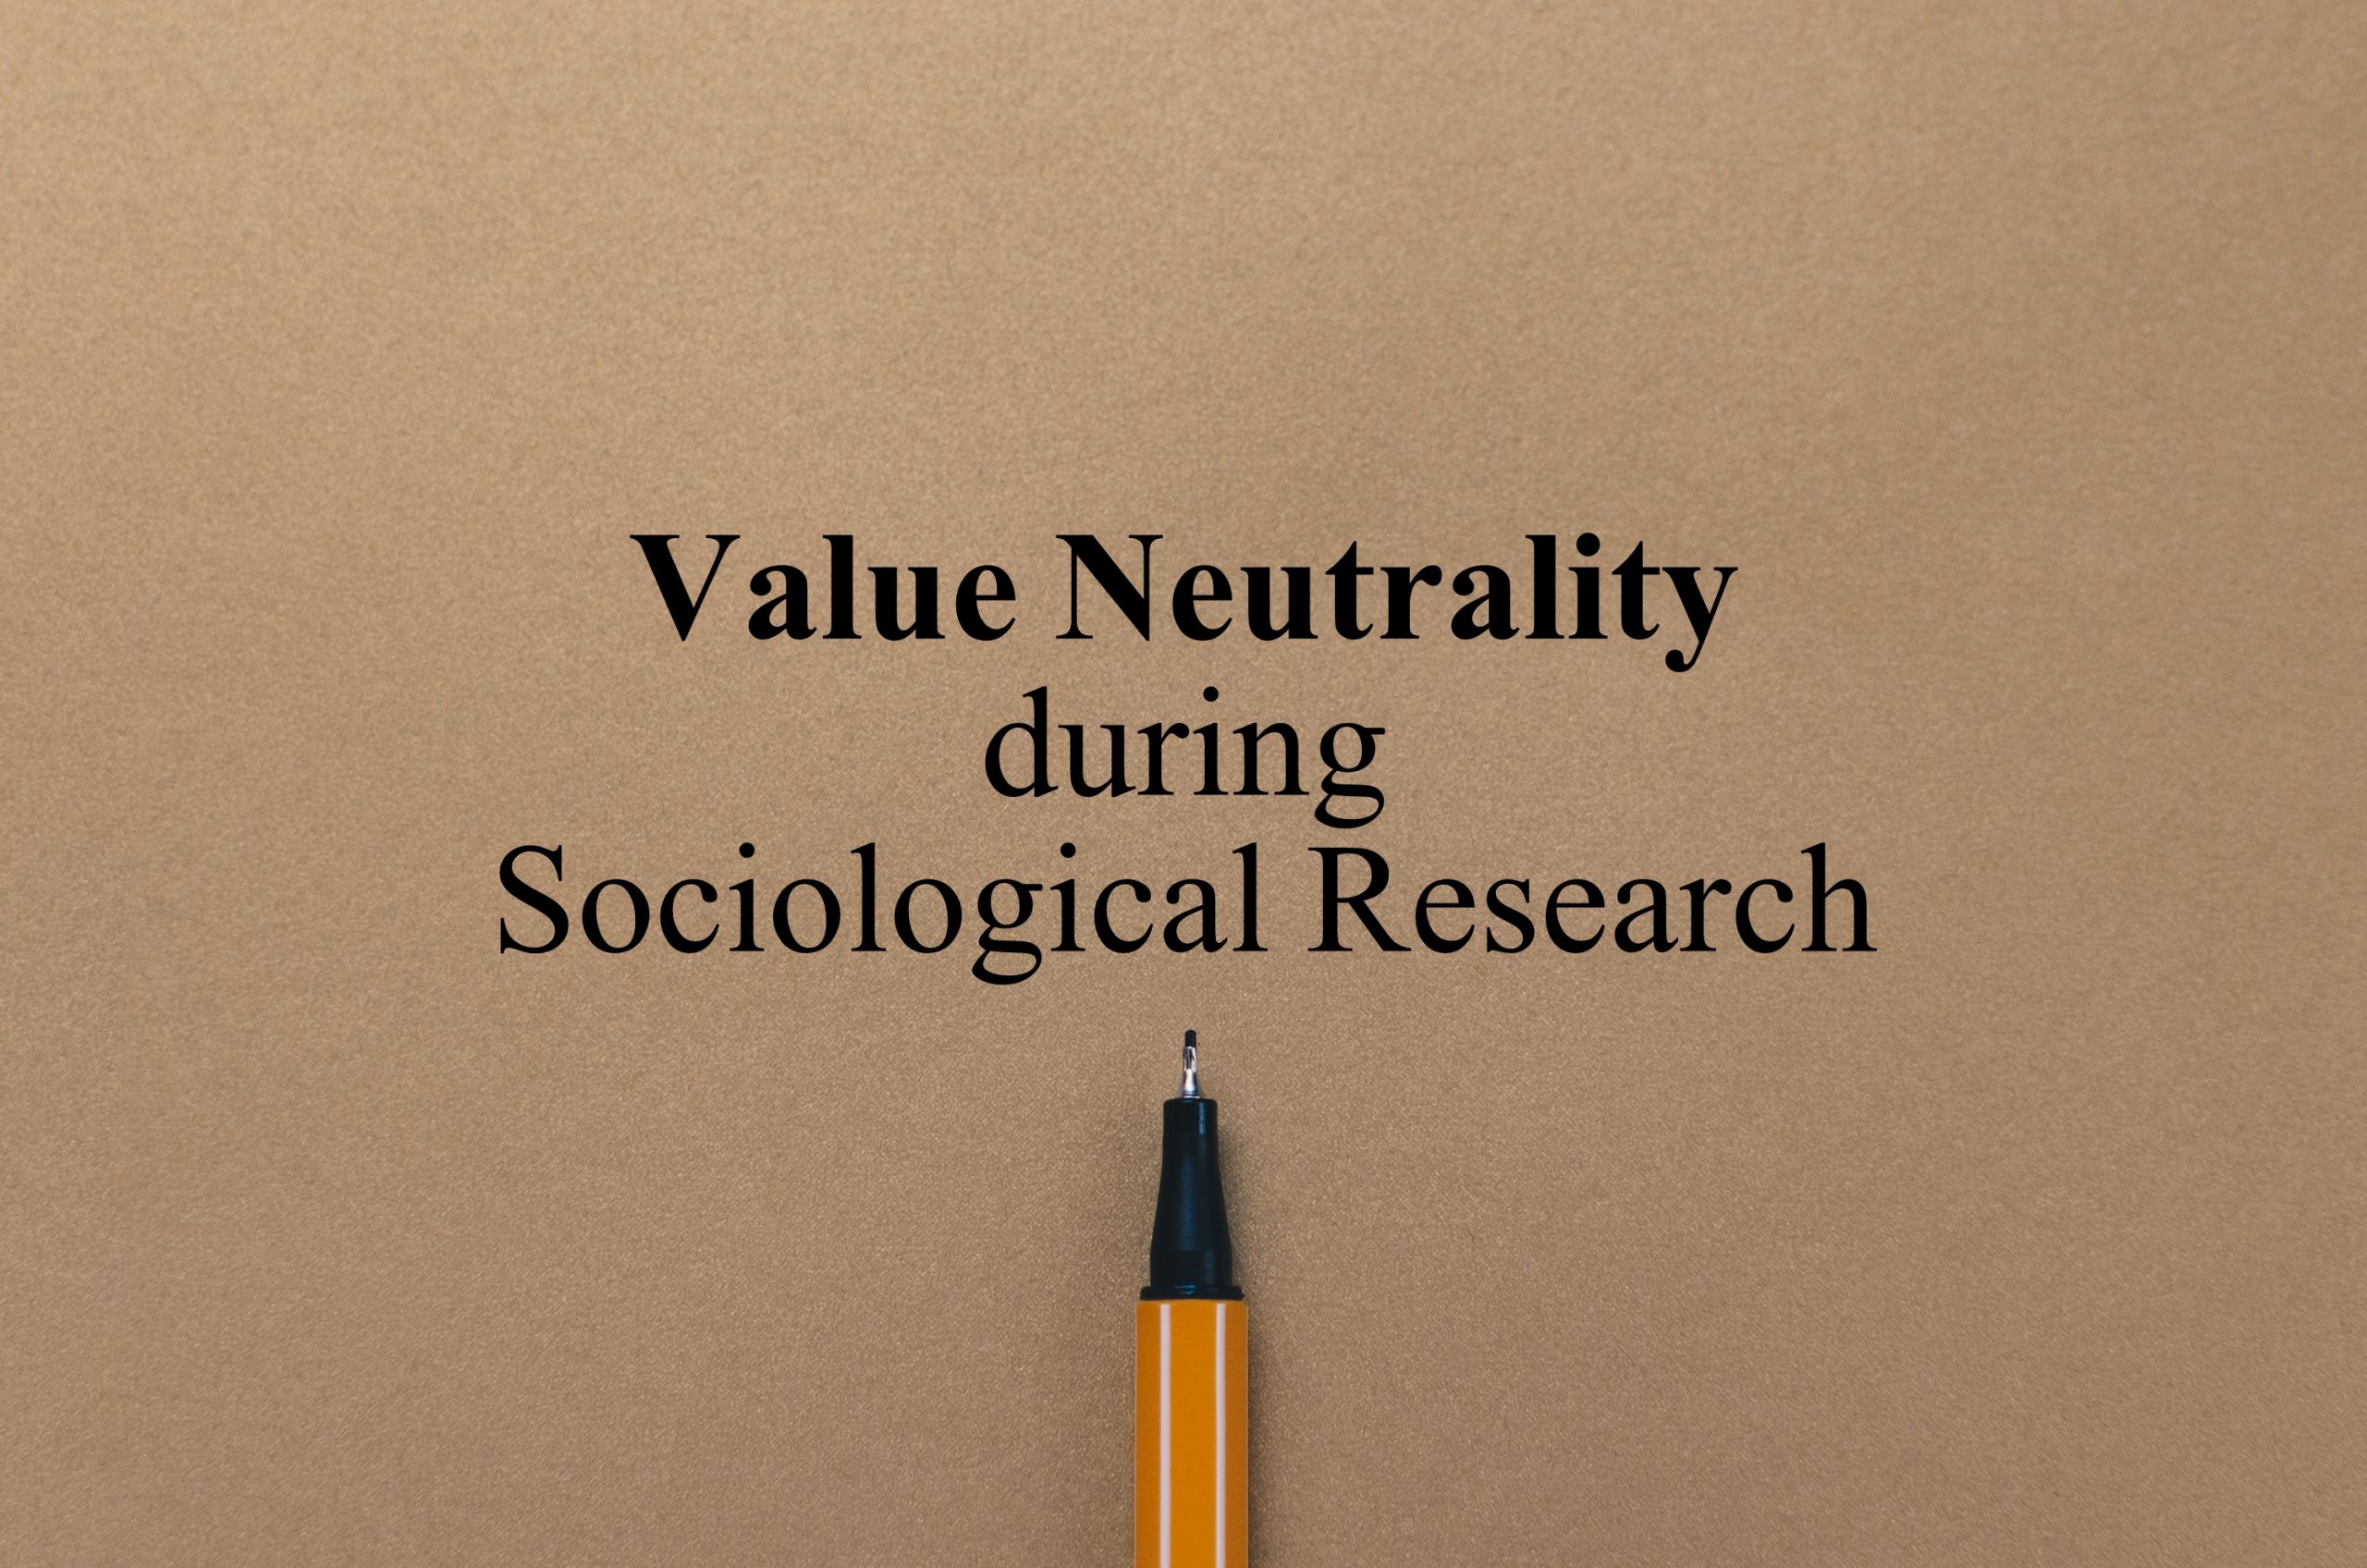 Value Neutrality in Sociological Research